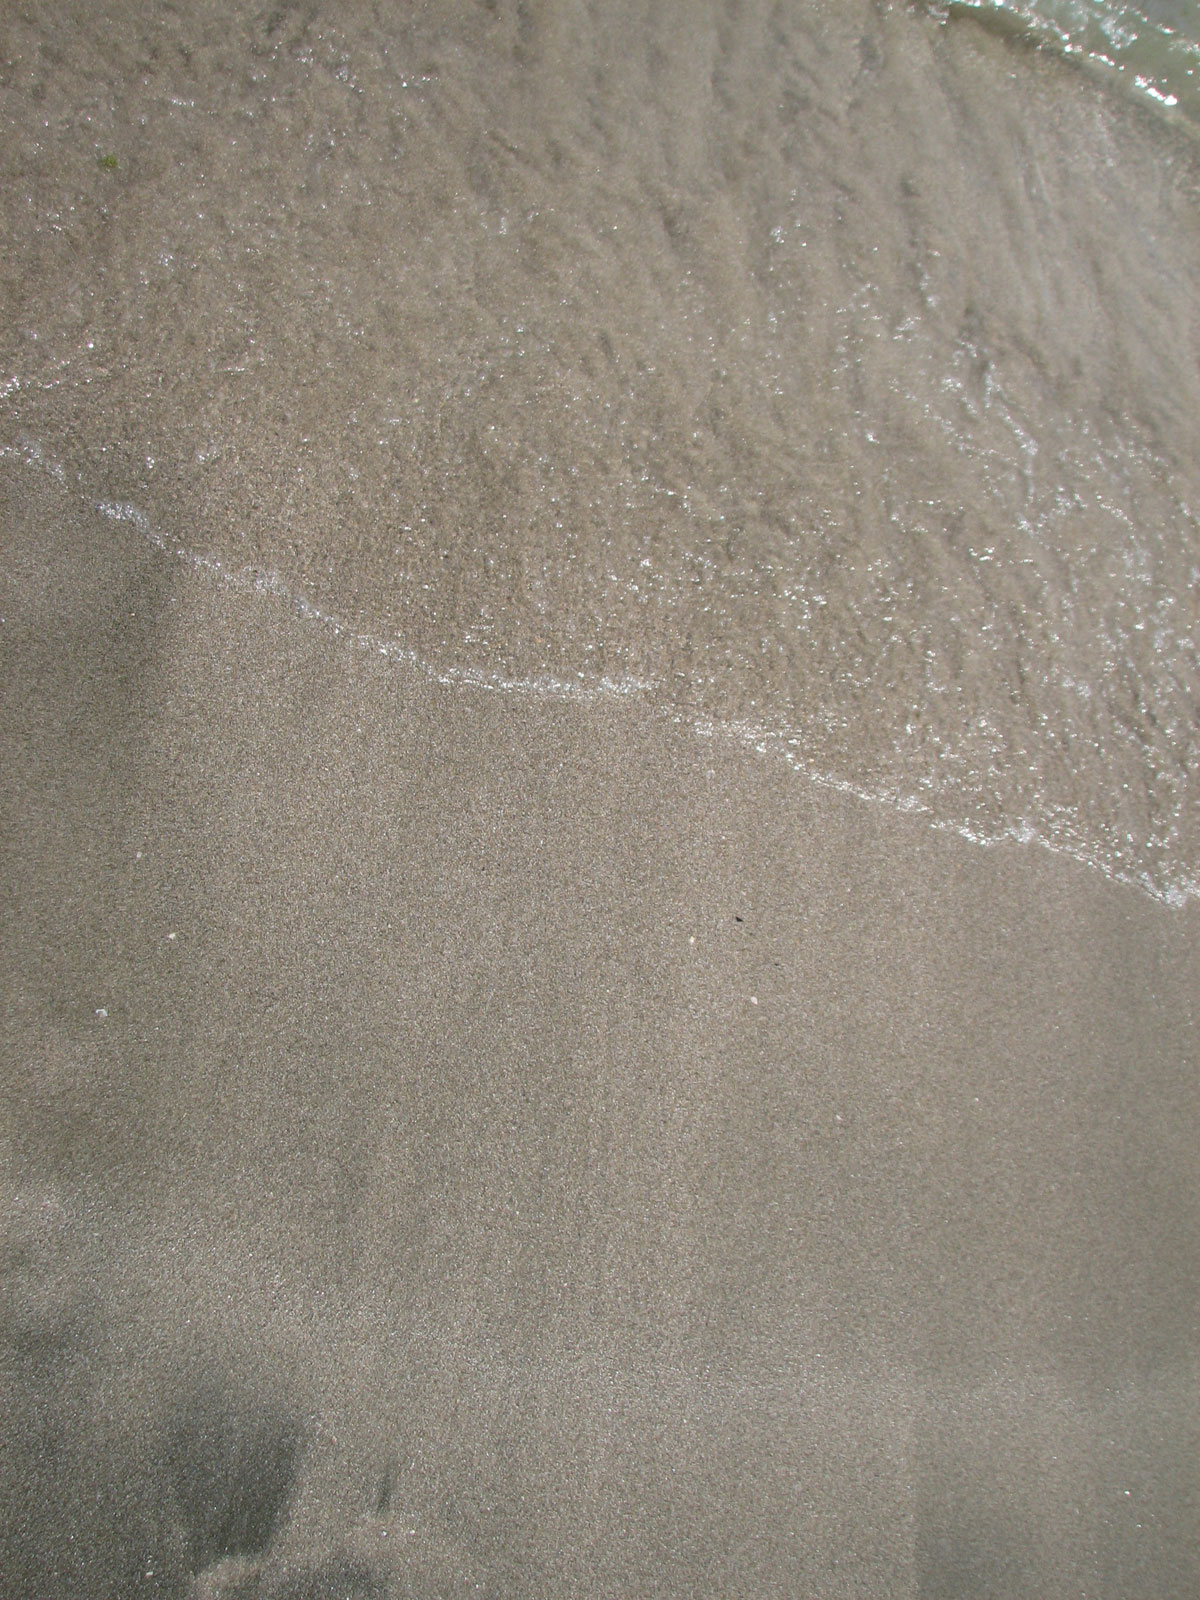 Sand-water-01 for Vertical Standard resolution